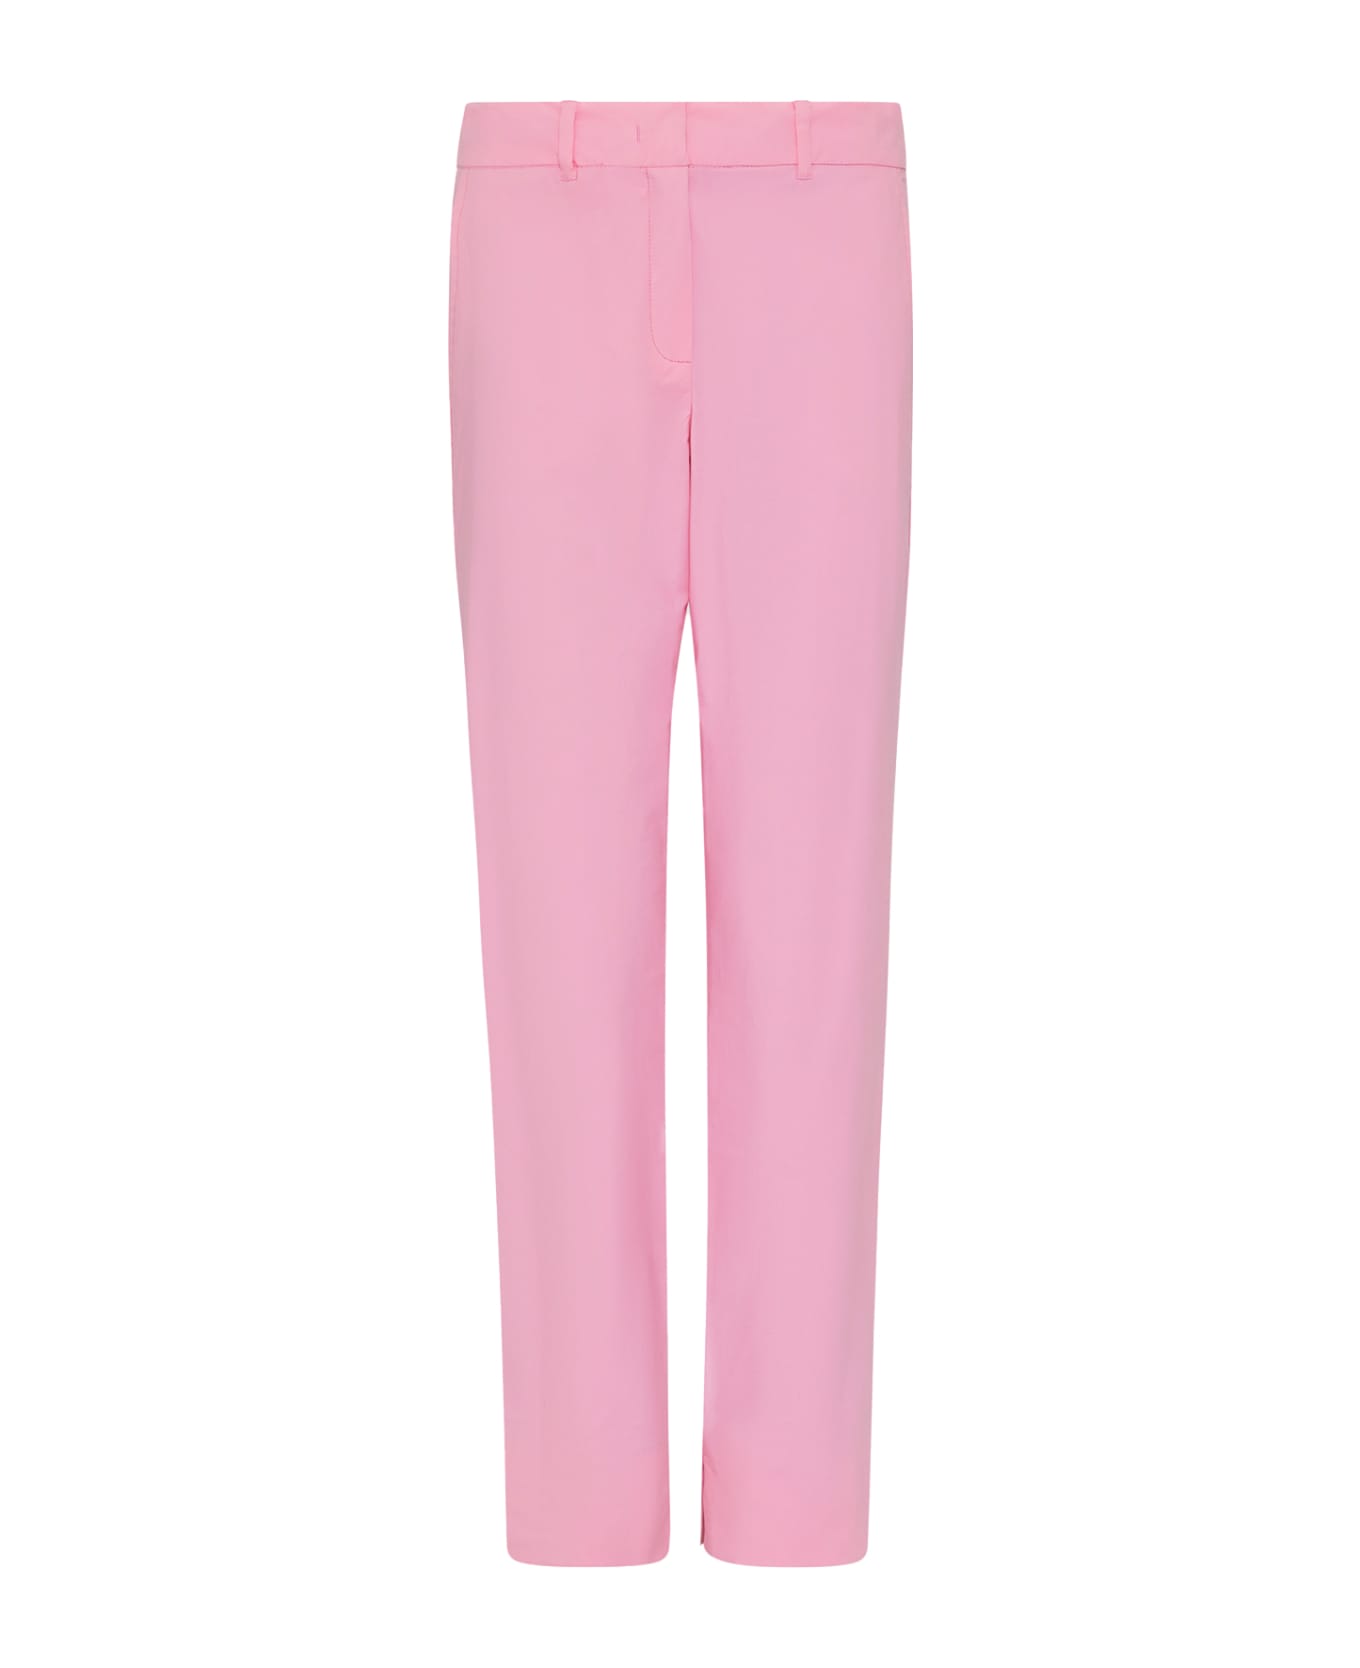 Marella Pink High-waisted Trousers - ROSA INTENSO ボトムス